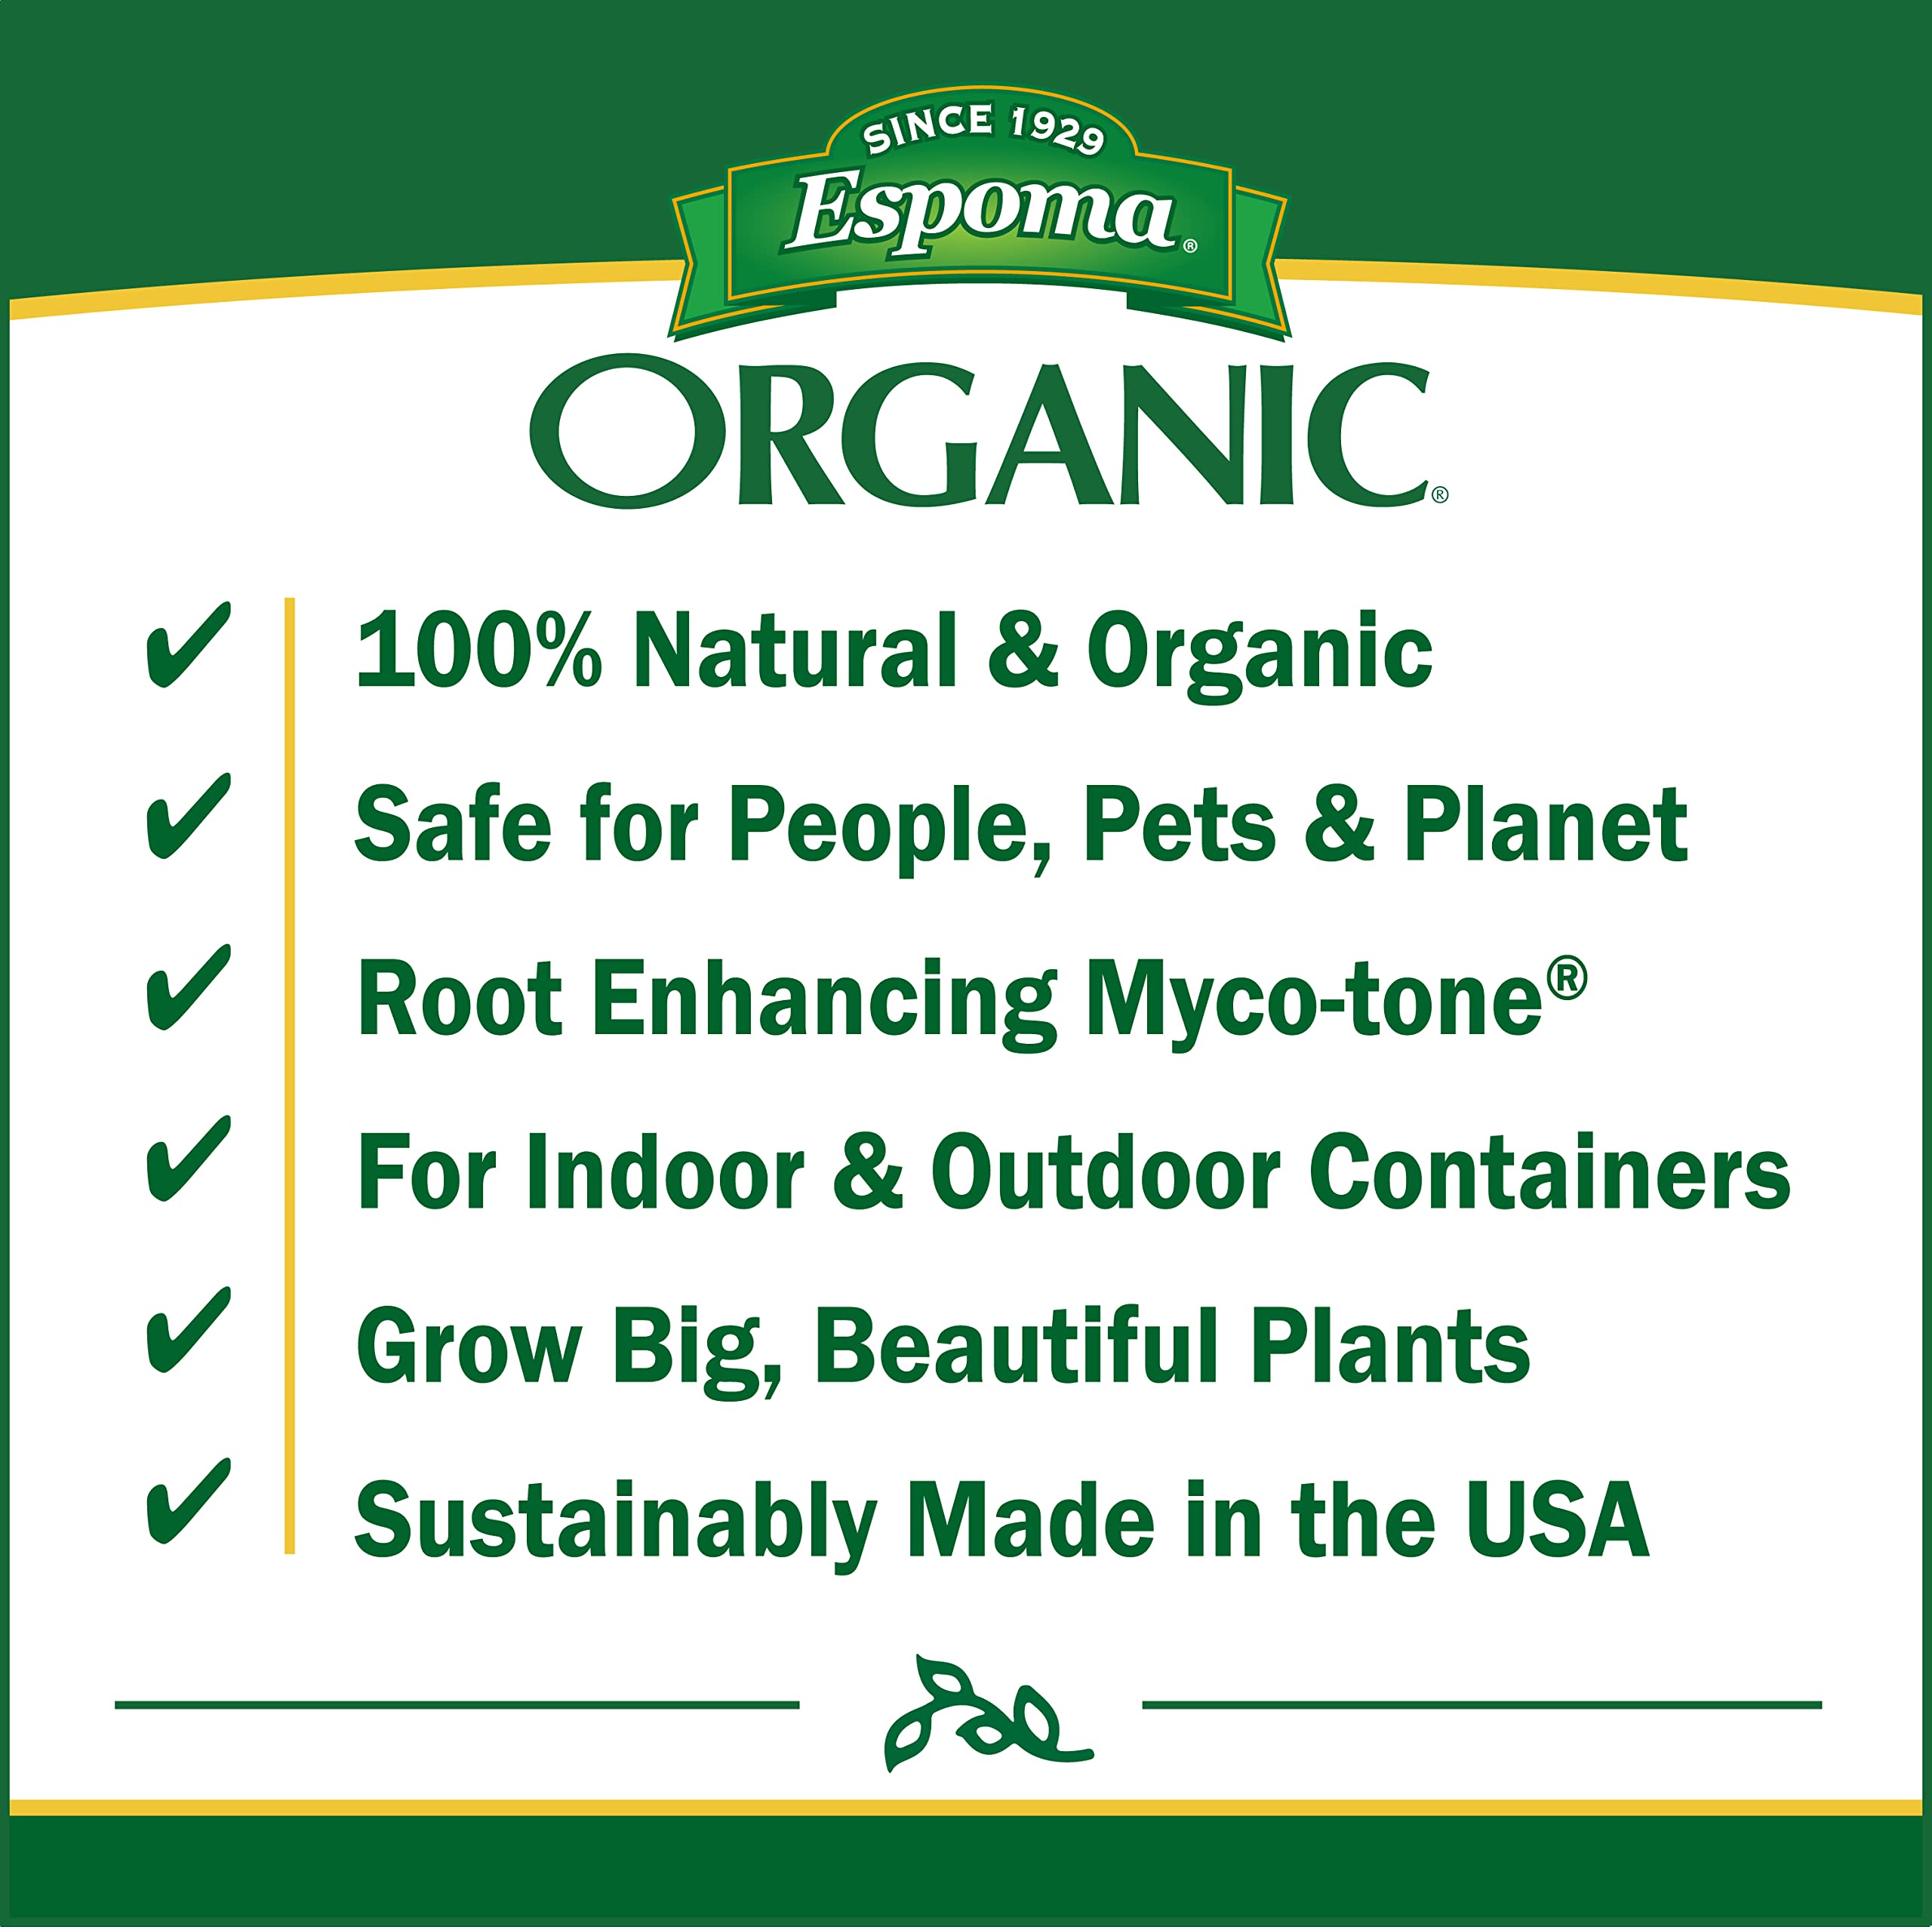 Espoma Organic Potting Soil Mix - All Natural Potting Mix For All Indoor & Outdoor Containers Including Herbs & Vegetables. For Organic Gardening, 8qt. bag. Pack of 2